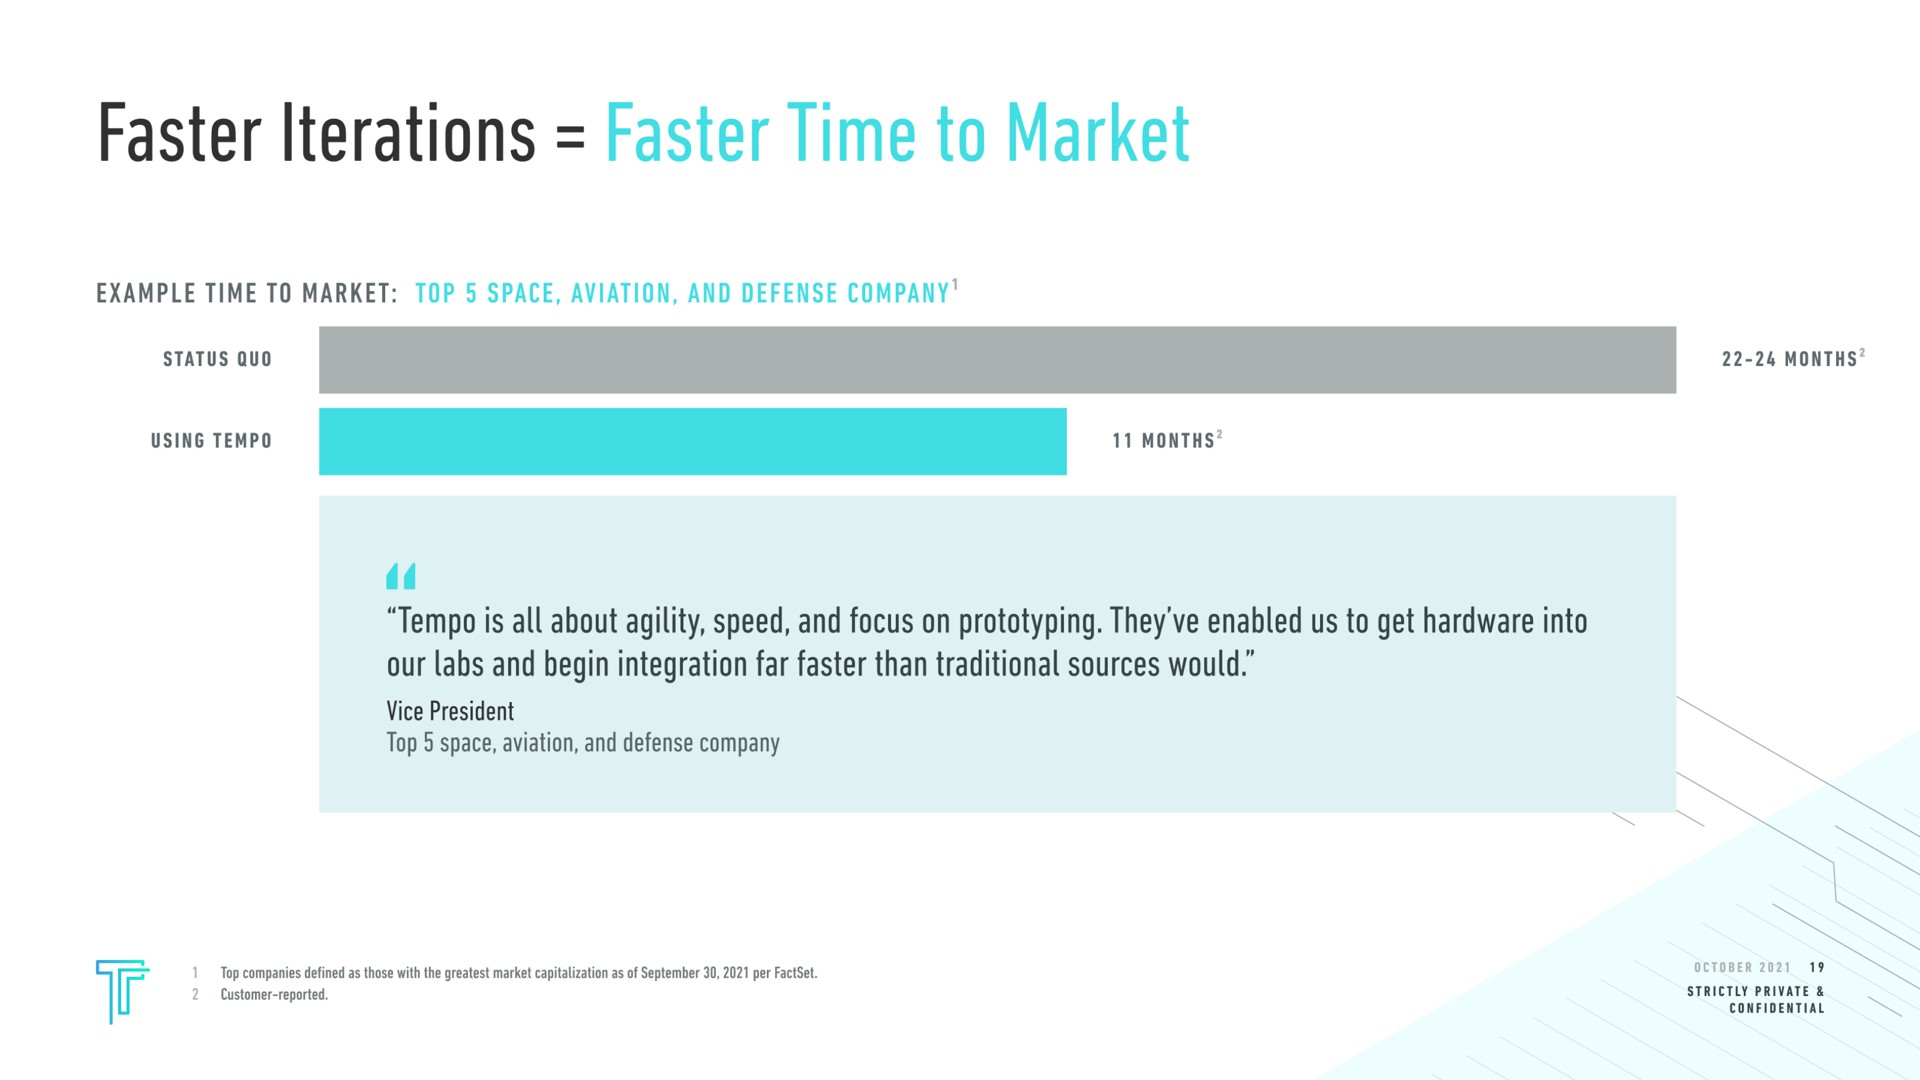 faster iterations faster time to market example time to market top space aviation and defense company tempo is all about agility speed and focus on they enabled us to get hardware into our labs and begin integration far faster than traditional sources would vice president top space aviation and defense company | Tempo